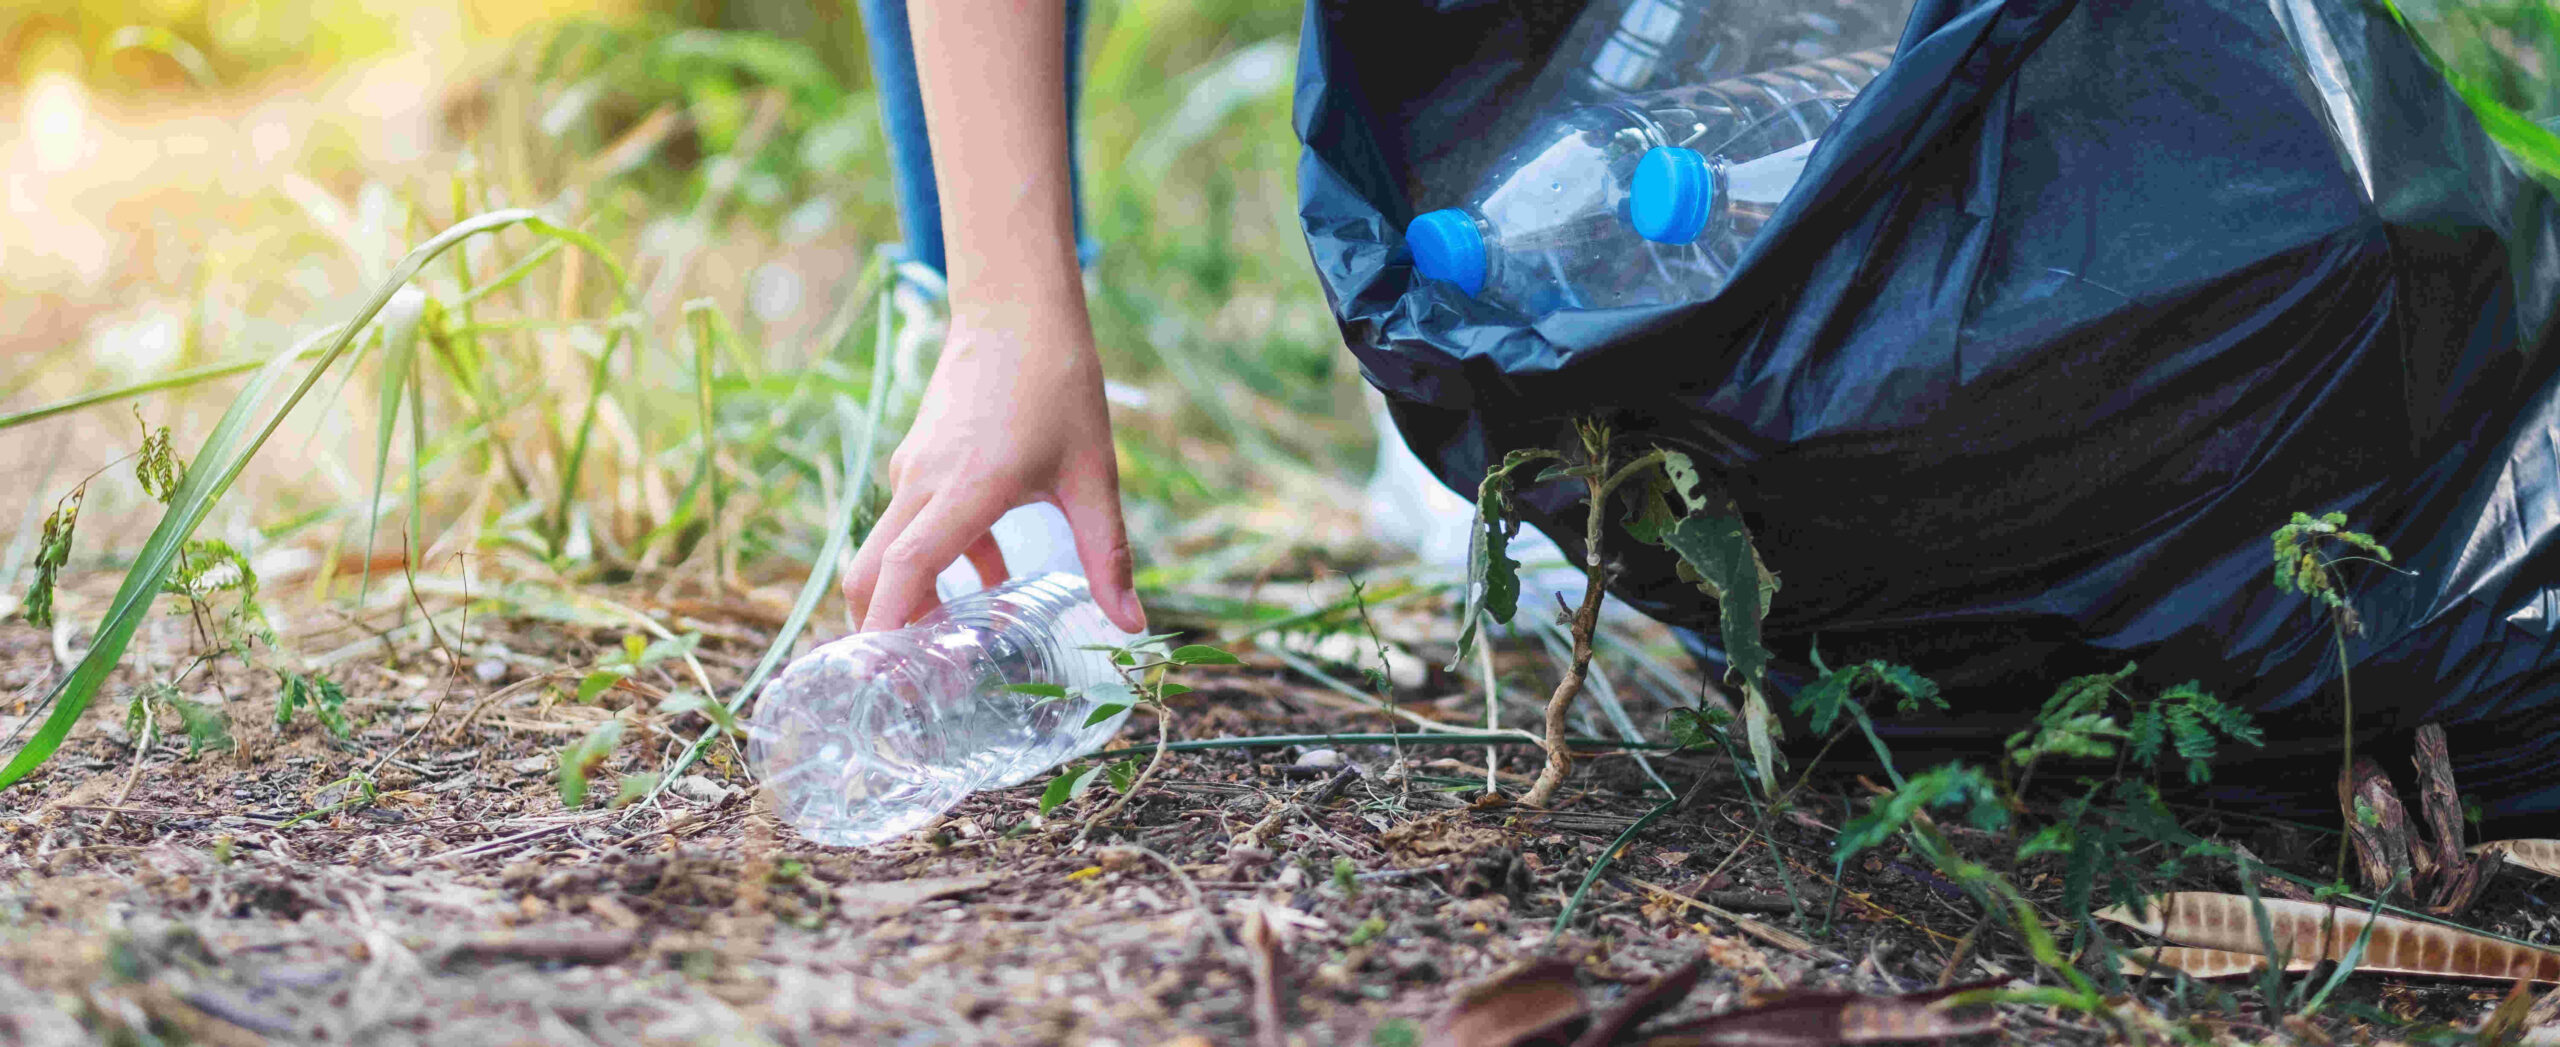 Closeup image of a woman picking up garbage plastic bottles into a bag for recycling concept